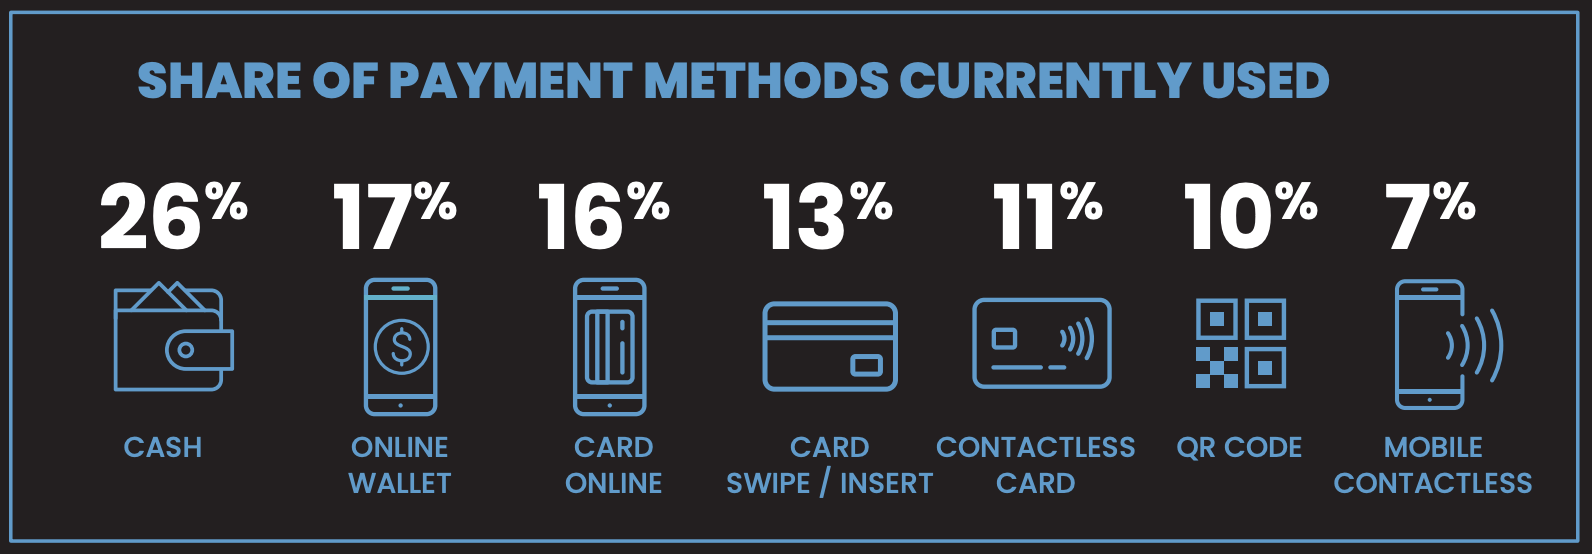 share of payment methods currently used